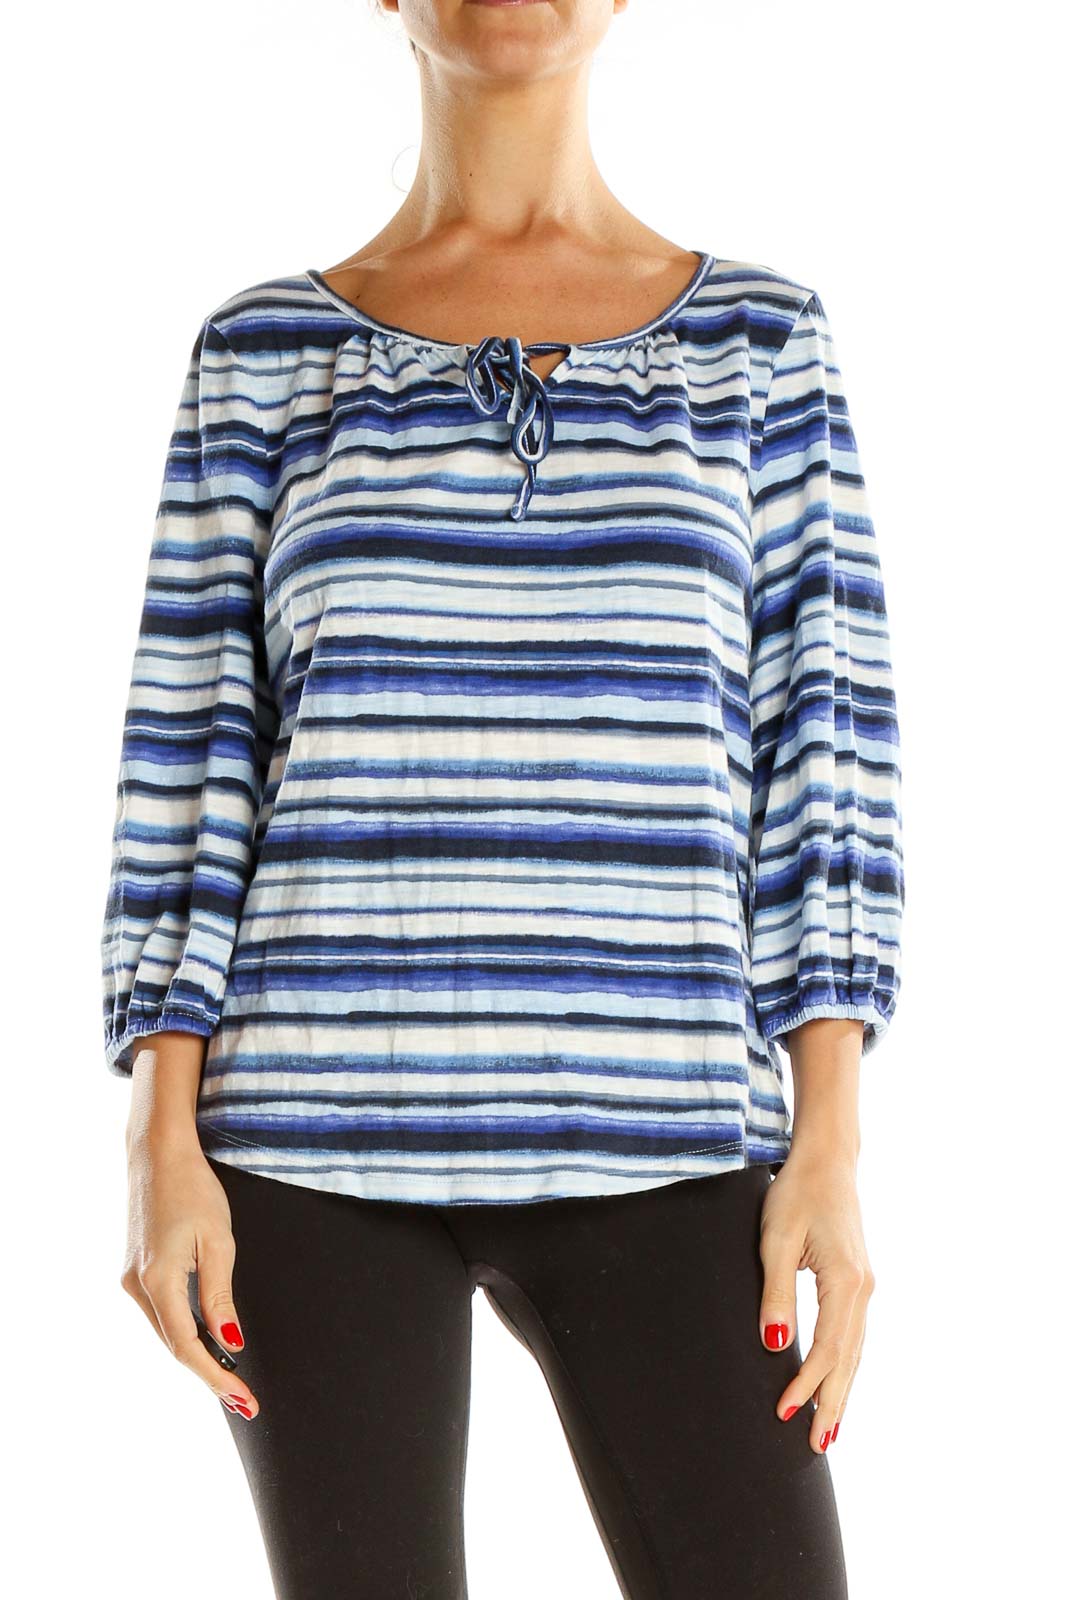 Blue White Striped All Day Wear Top Front